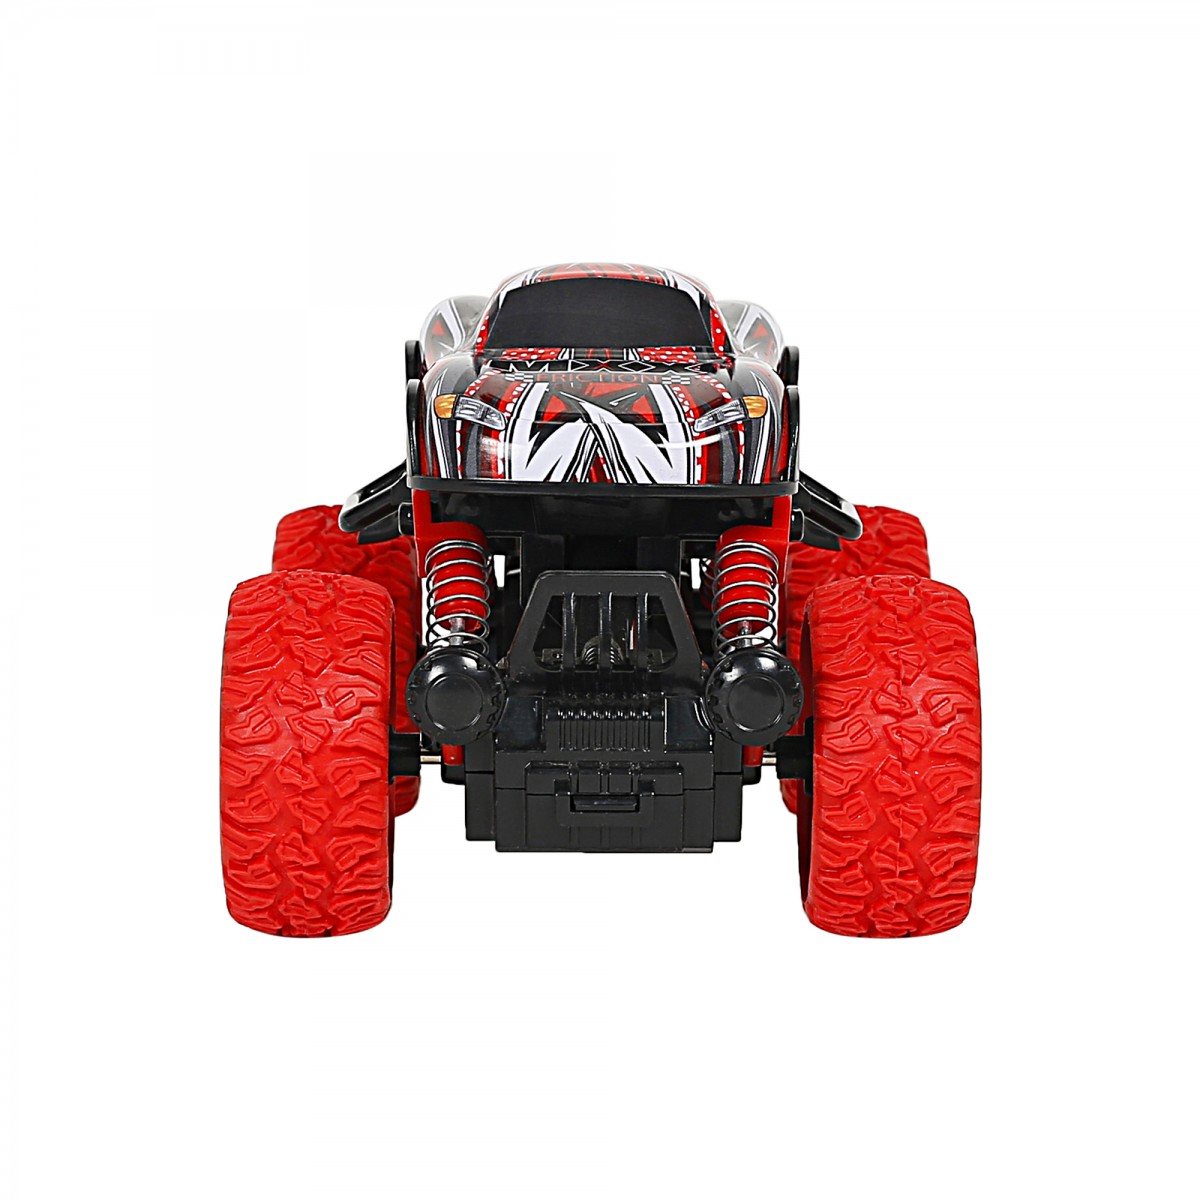 Ralleyz Pull Back Monster Car for Kids, 3Y+, Red